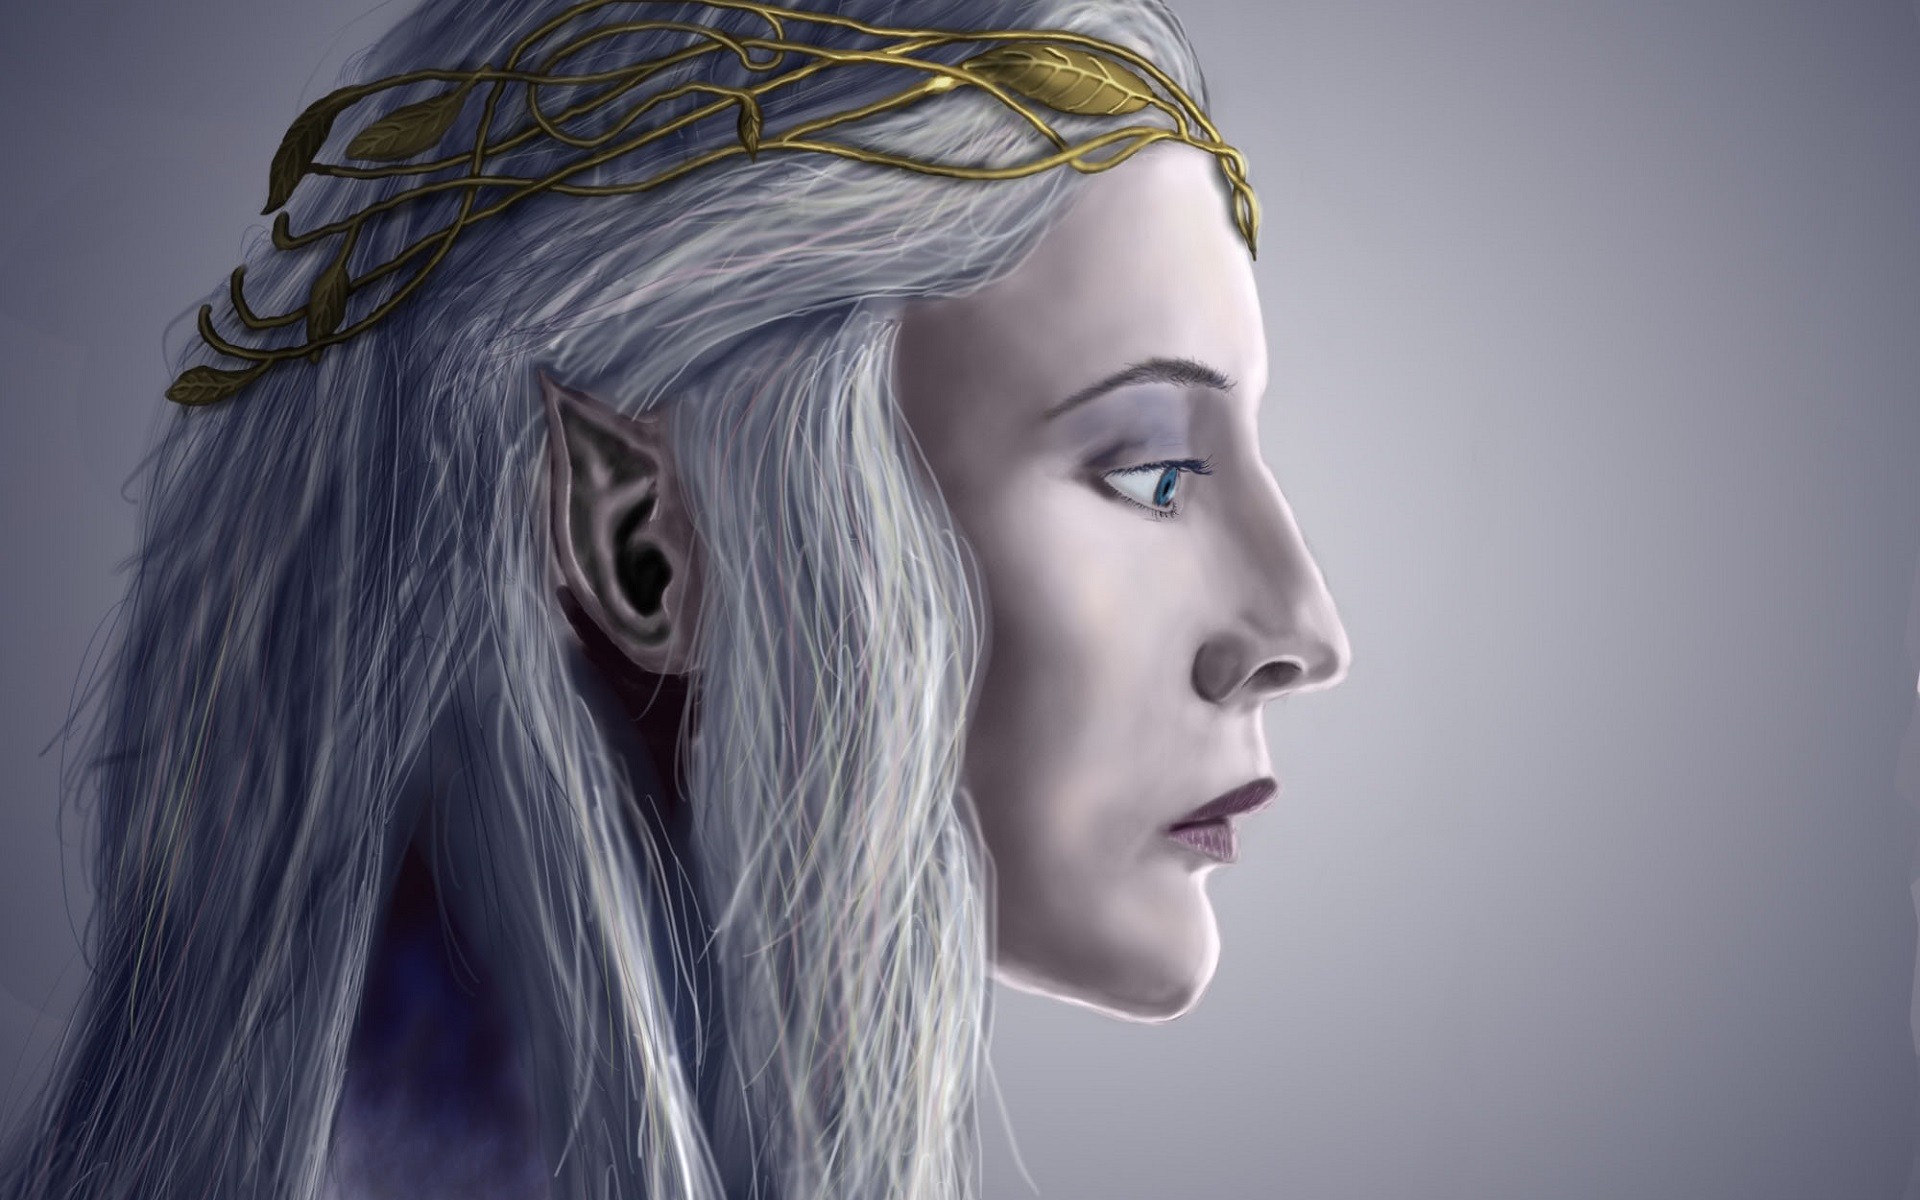 Artwork Galadriel Elves Women Face Blue Eyes The Lord Of The Rings Fantasy Art 1920x1200